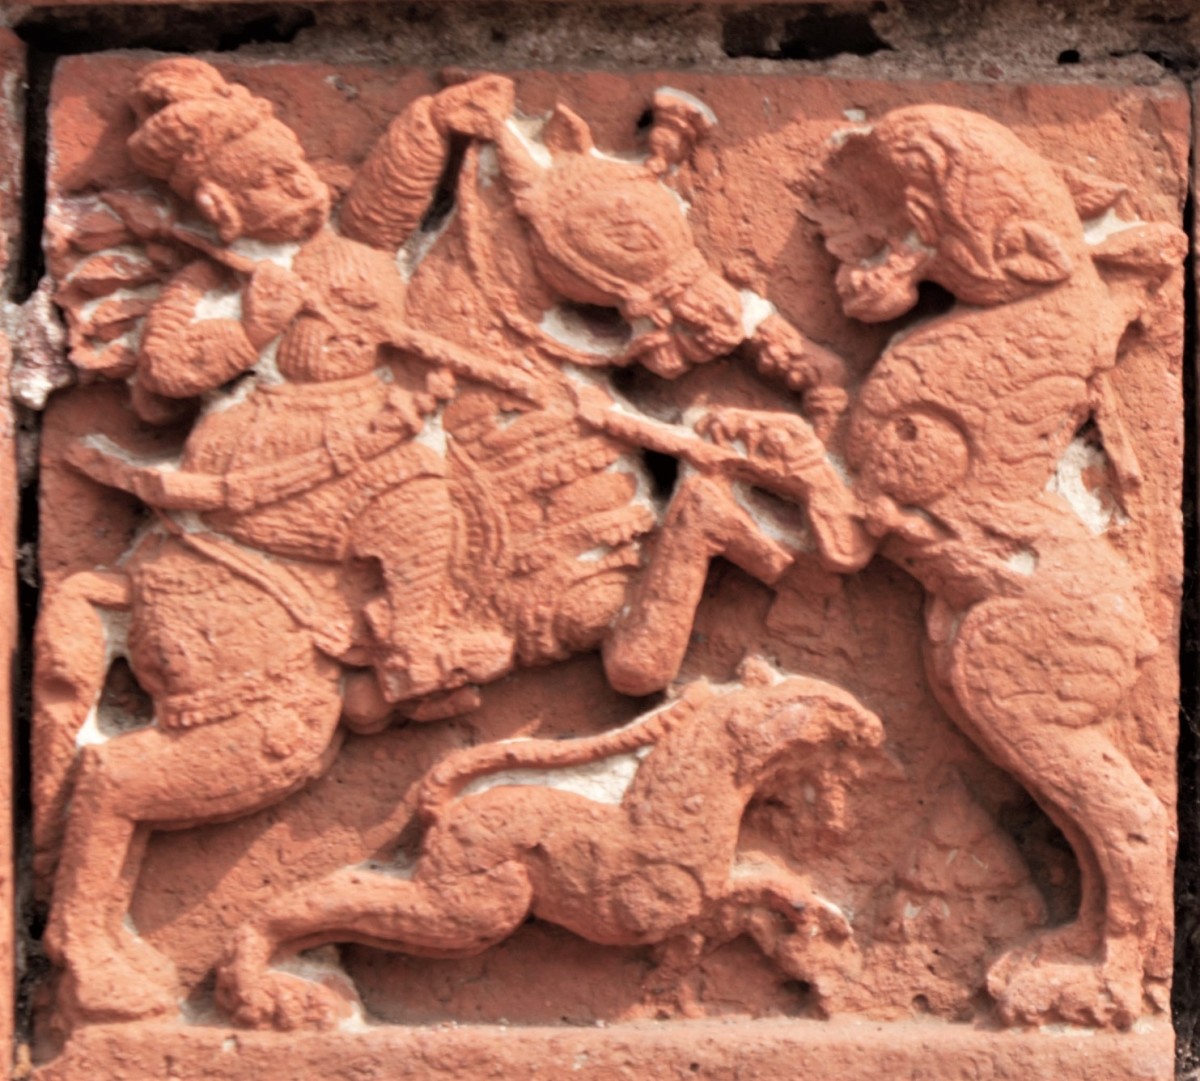 Social event in temple decoration : hunting scene; Terracotta; Ramchandra temple, Guptipara, district Hooghly